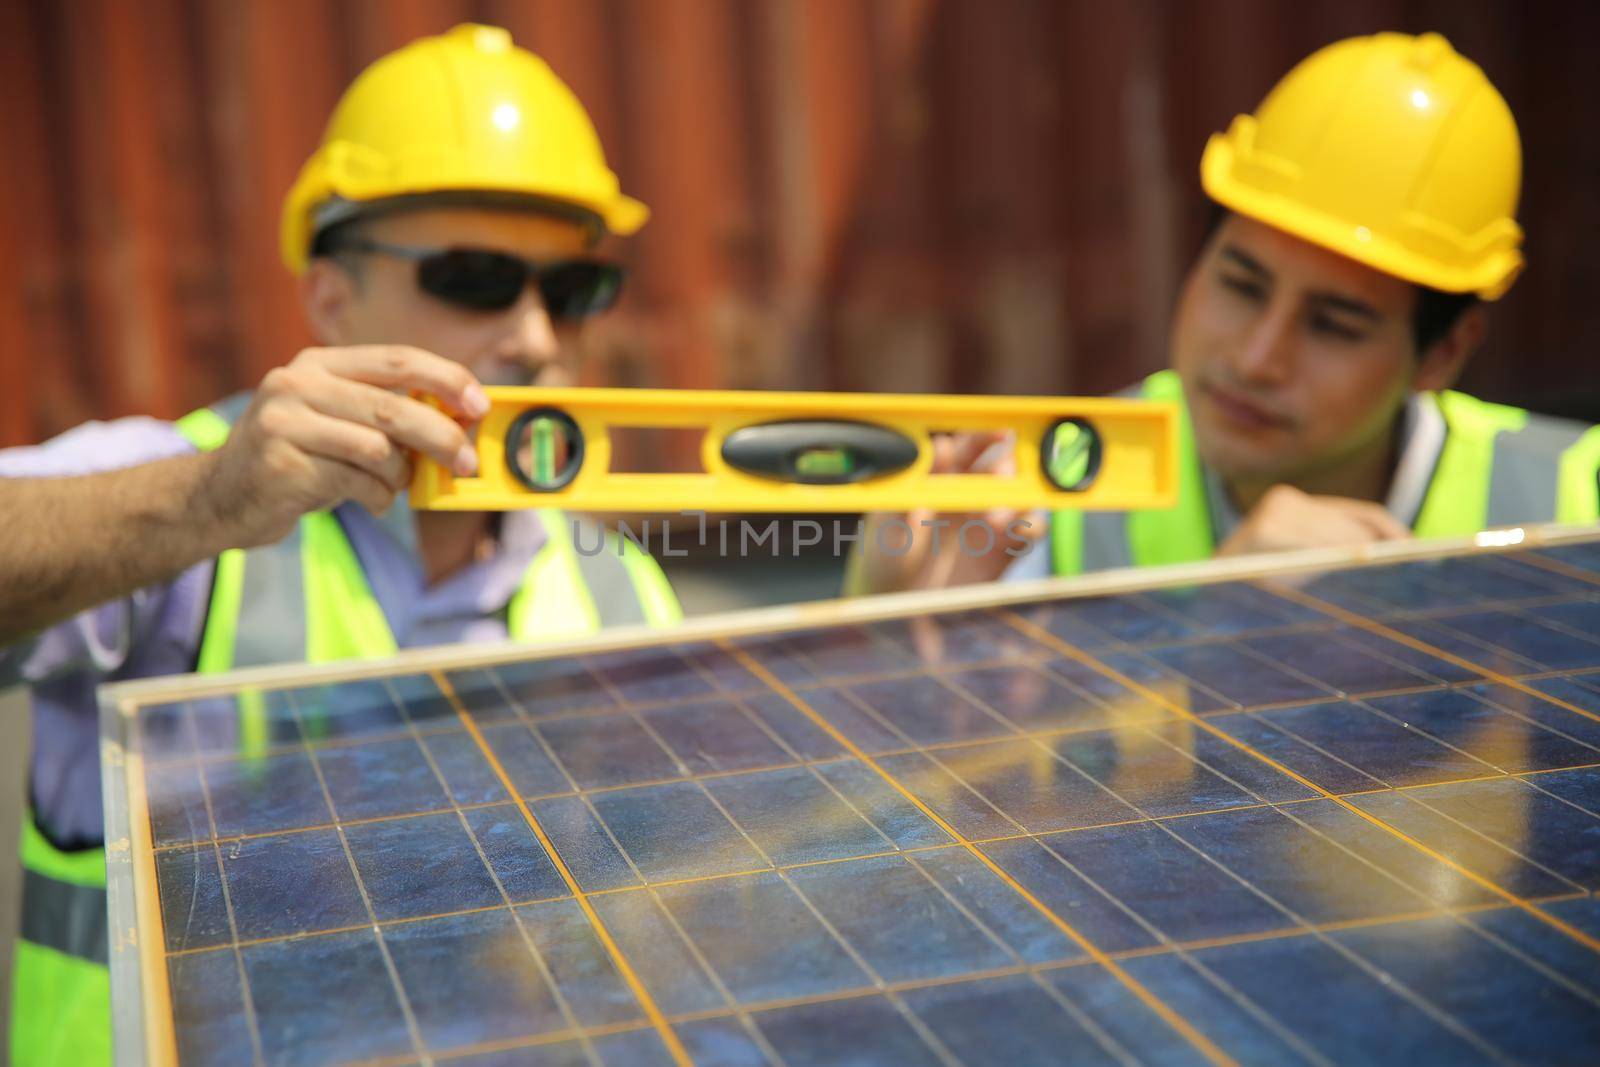 technicians install panels Solar cells to produce and distribute electricity. Energy technology concept